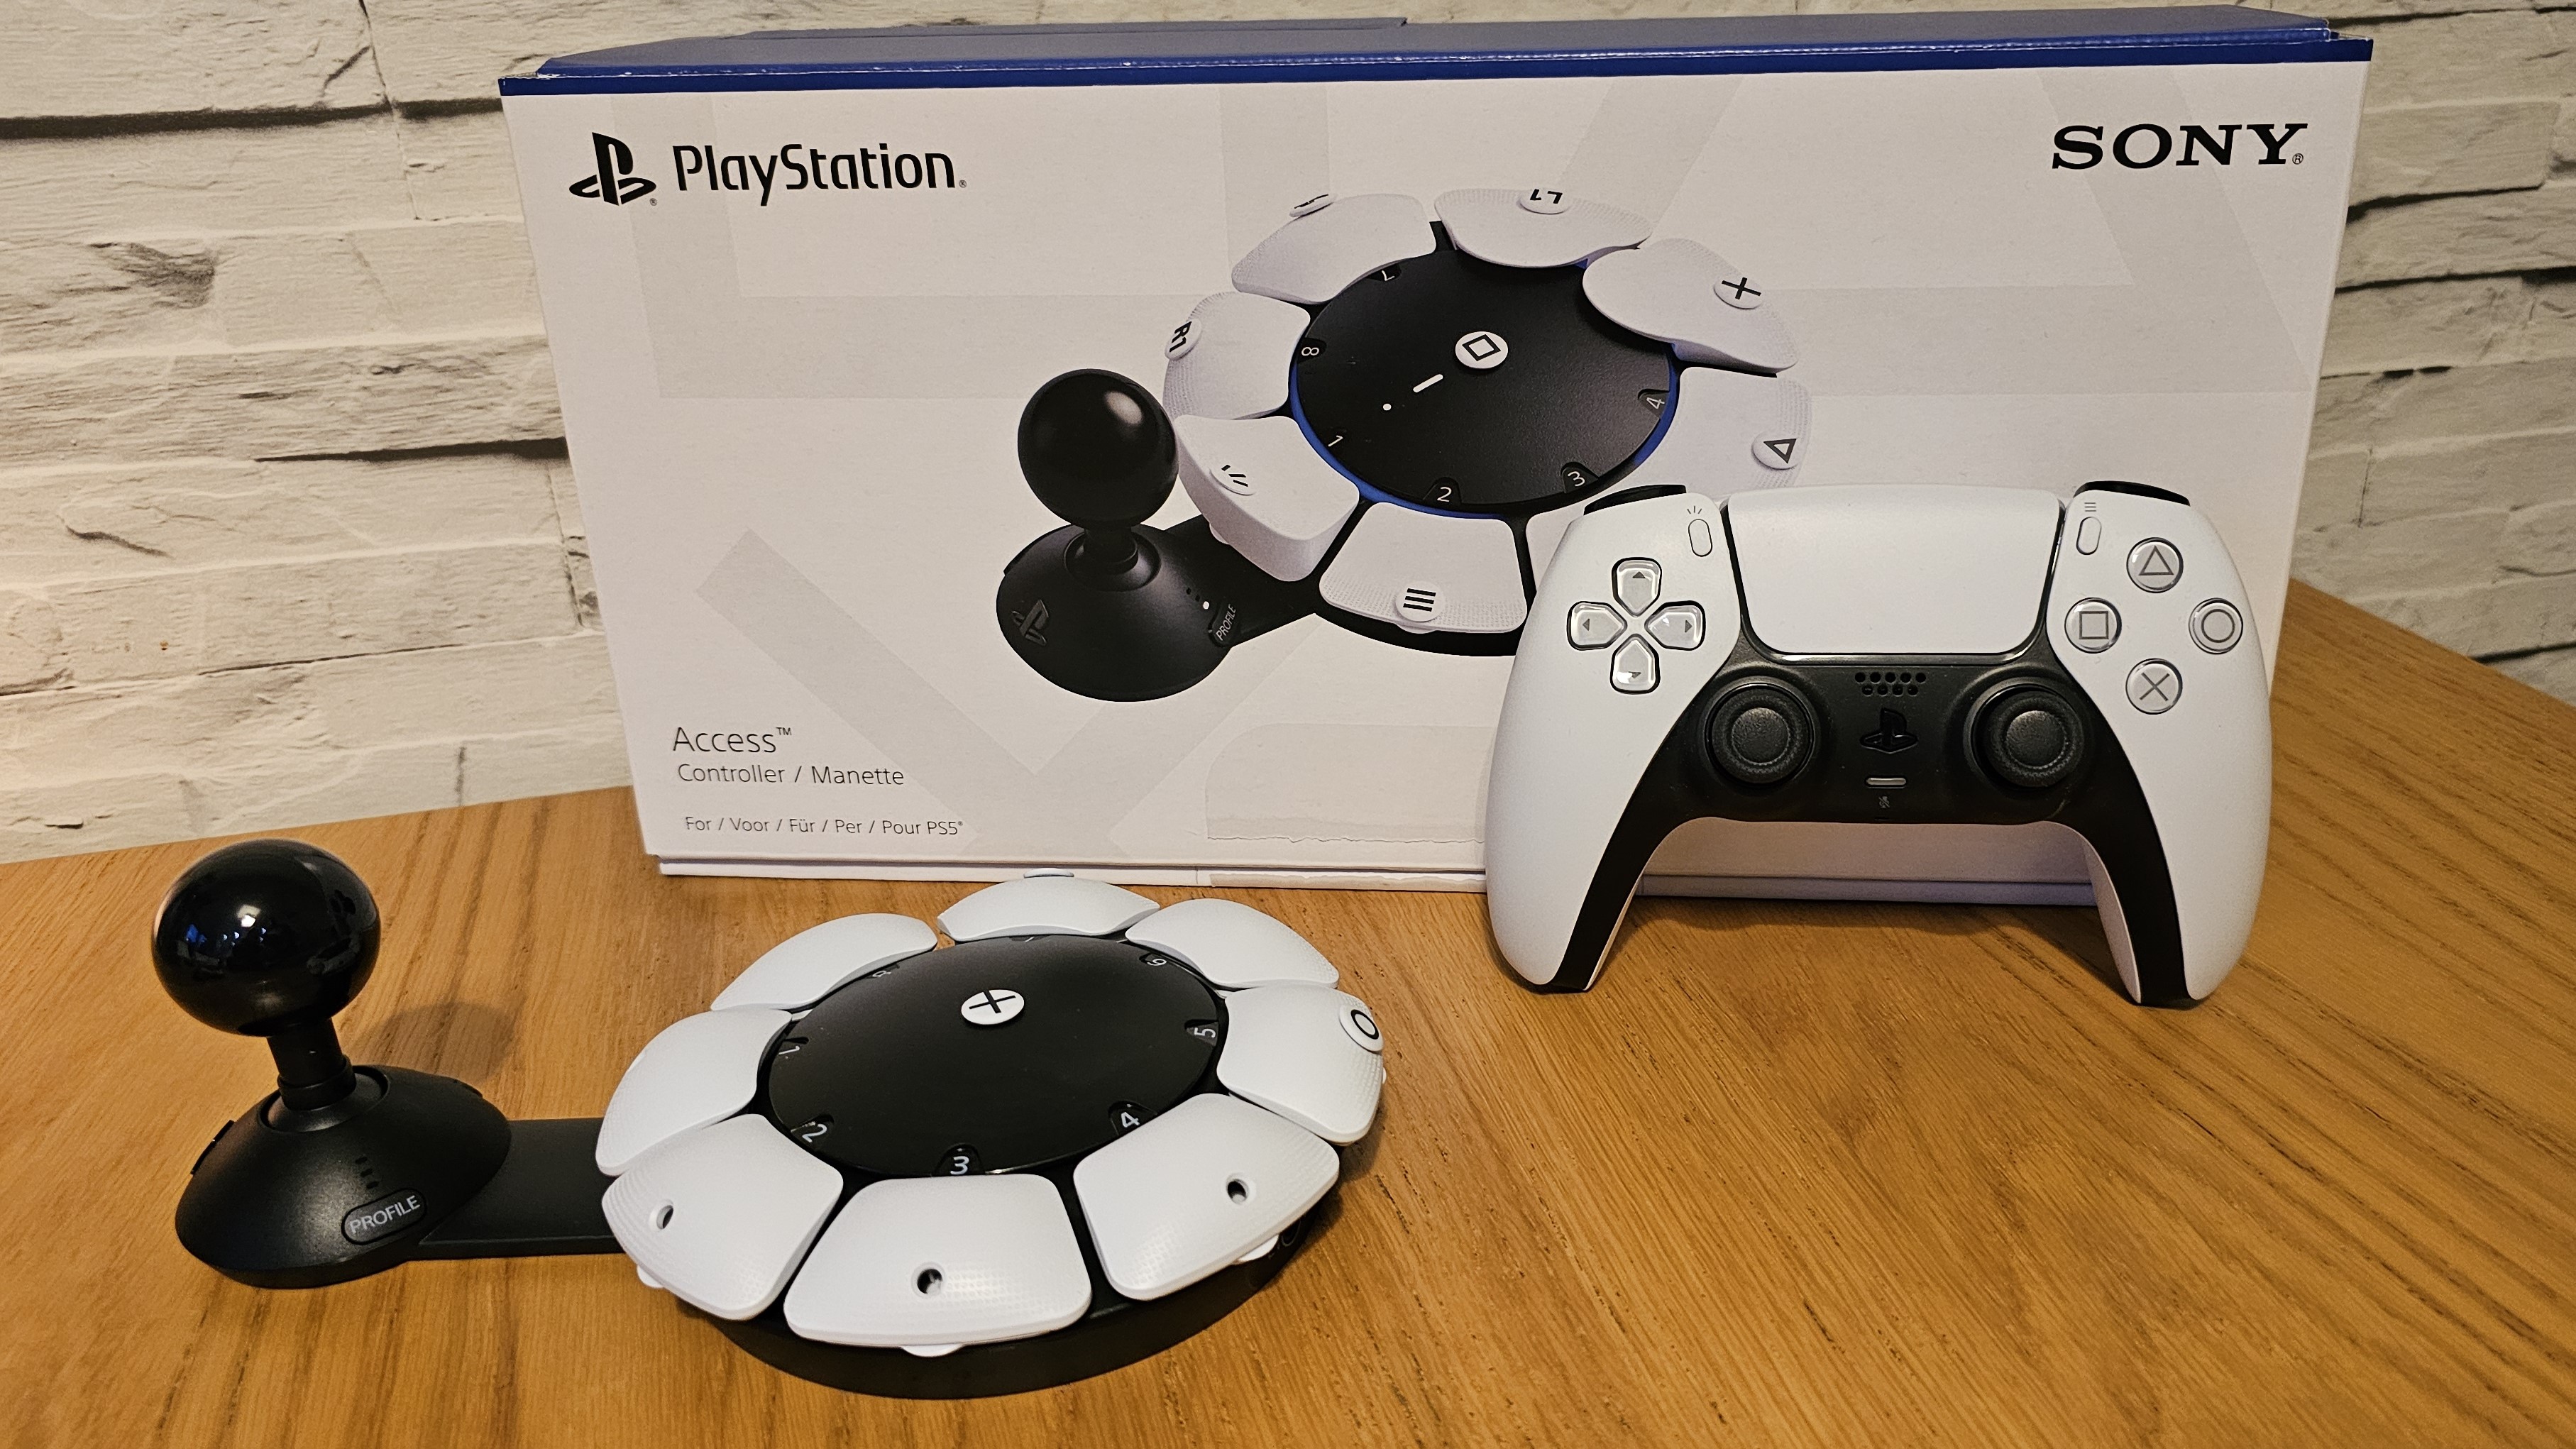 The PlayStation Access controller on a wooden surface next to its box and a PS5 DualSense controller